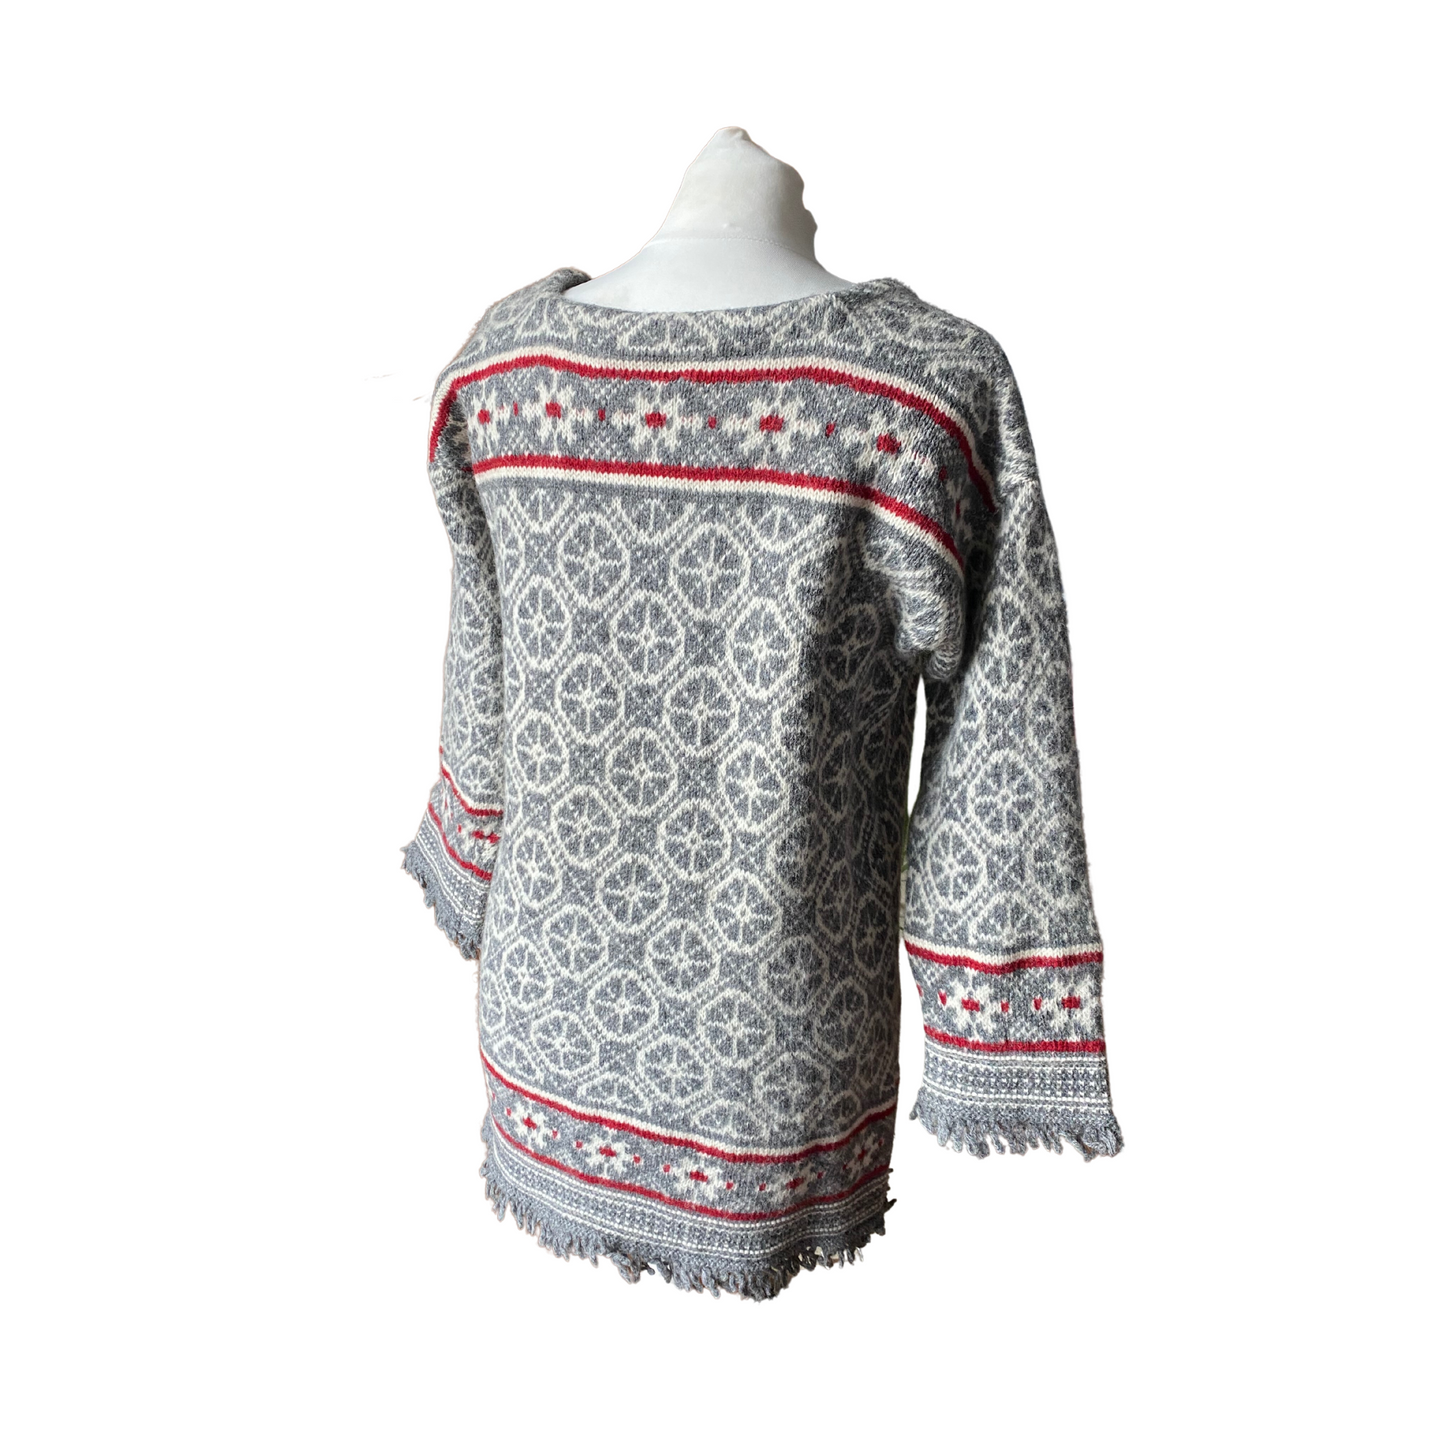 Longer length vintage Sisley jumper - perfect for layering over jeans